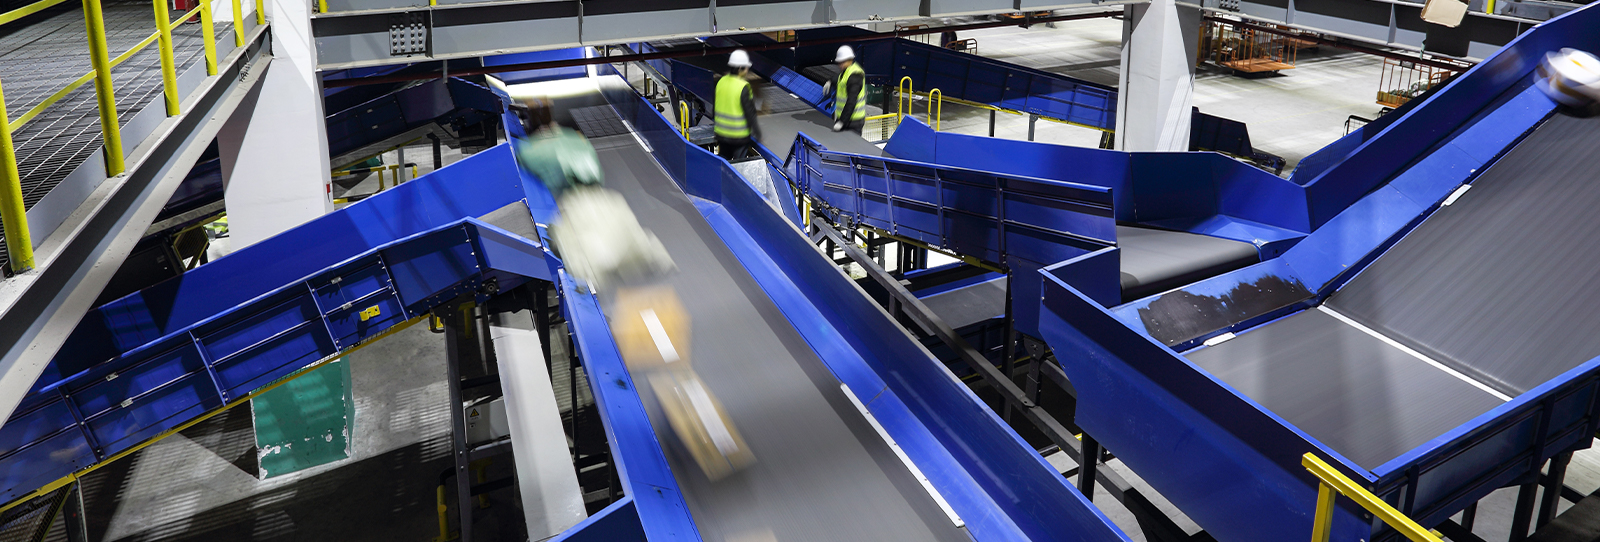 Warehousing and Distribution Conveyor Solutions